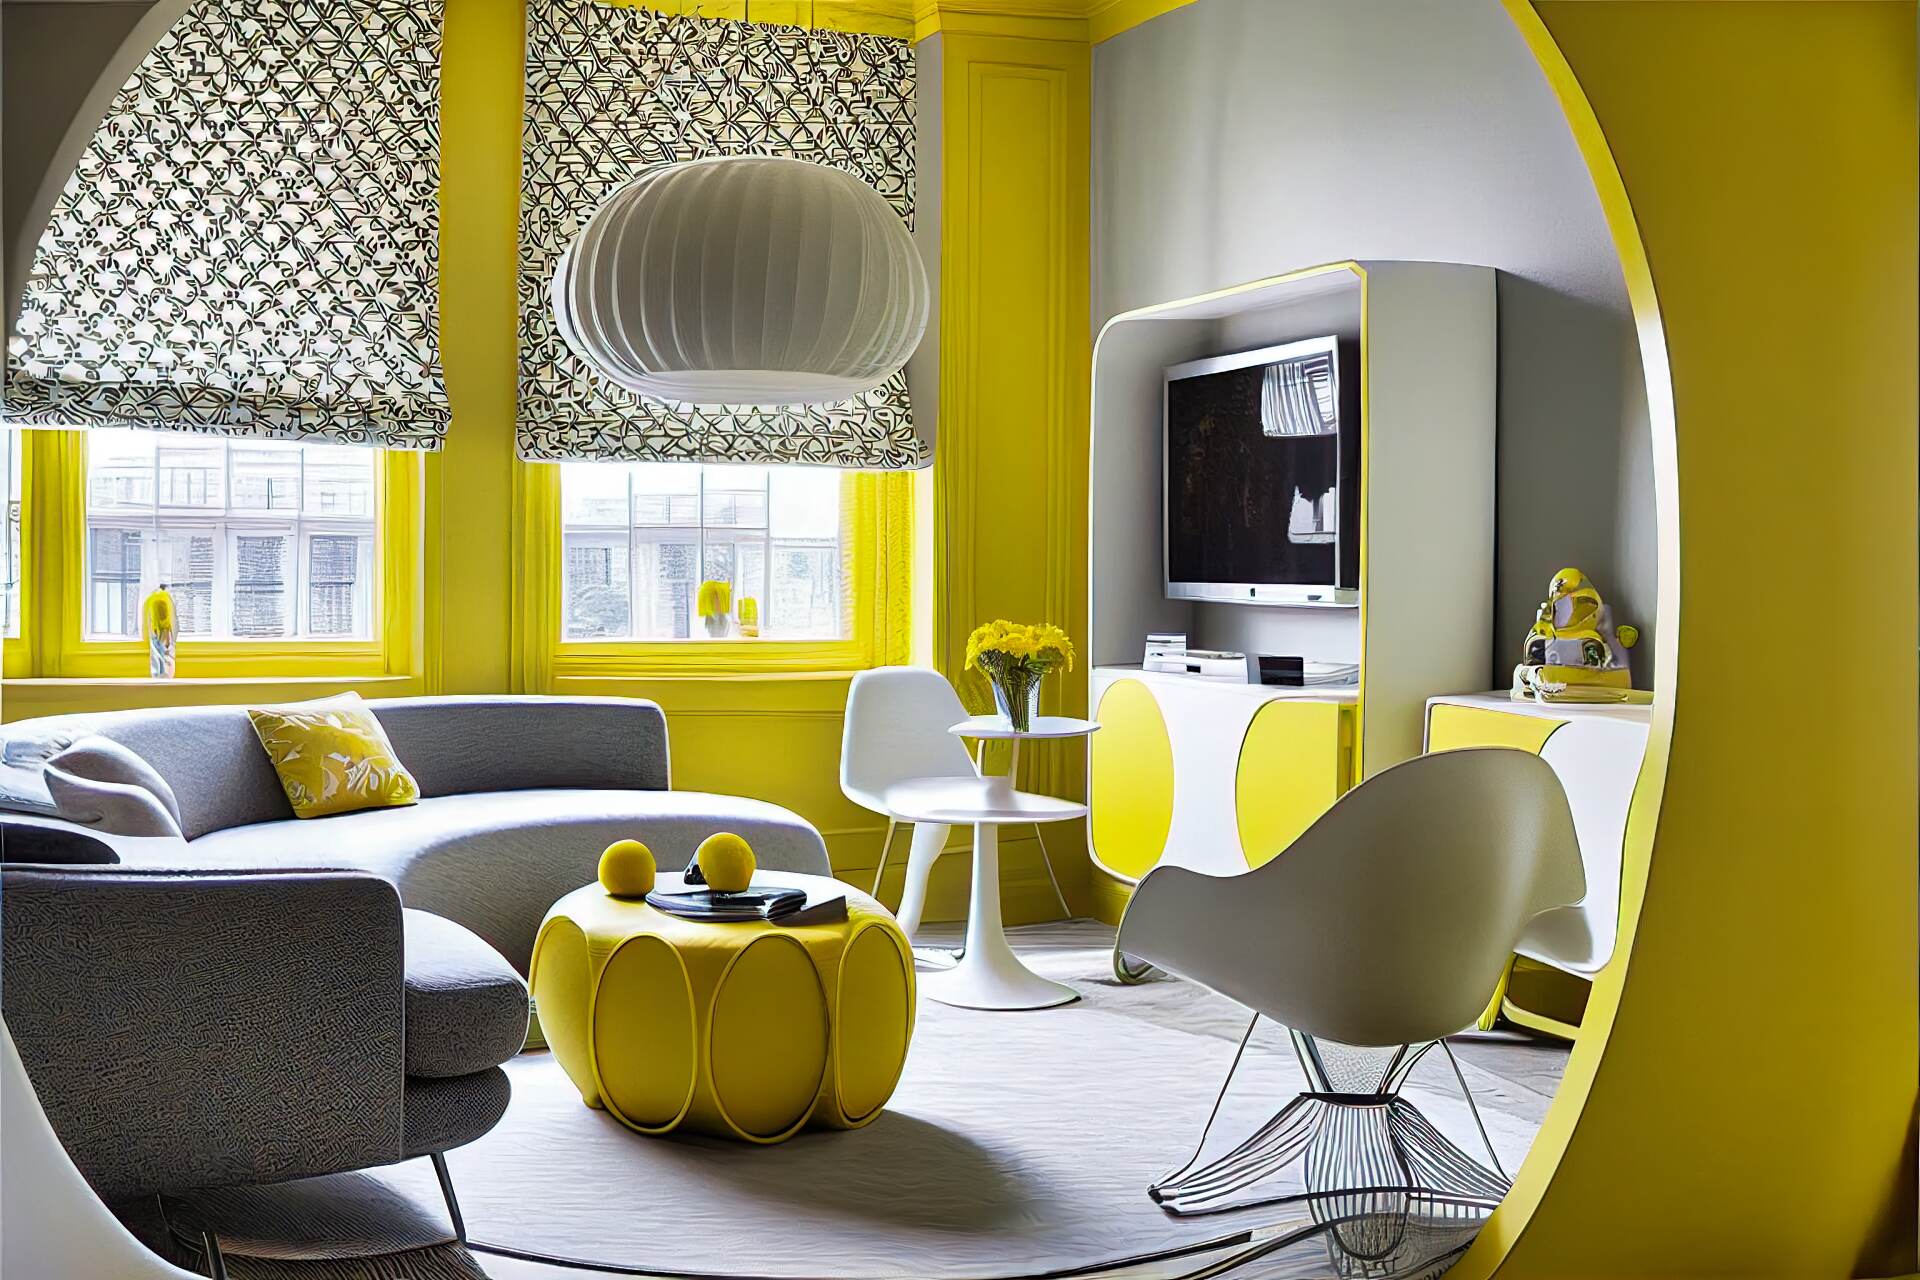 A Living Room With A Retro-Meets-Futuristic Vibe. Bright Yellow Walls Are Offset With A Grey And White Patterned Rug. A Round White Coffee Table Is Set In The Center, With A Vintage-Style Tv In The Corner. White Armchairs And A Bright Yellow Sofa Provide Plenty Of Seating. A Mod-Style Pendant Lamp Hangs From The Ceiling, With A Sleek Silver Floor Lamp Nearby.